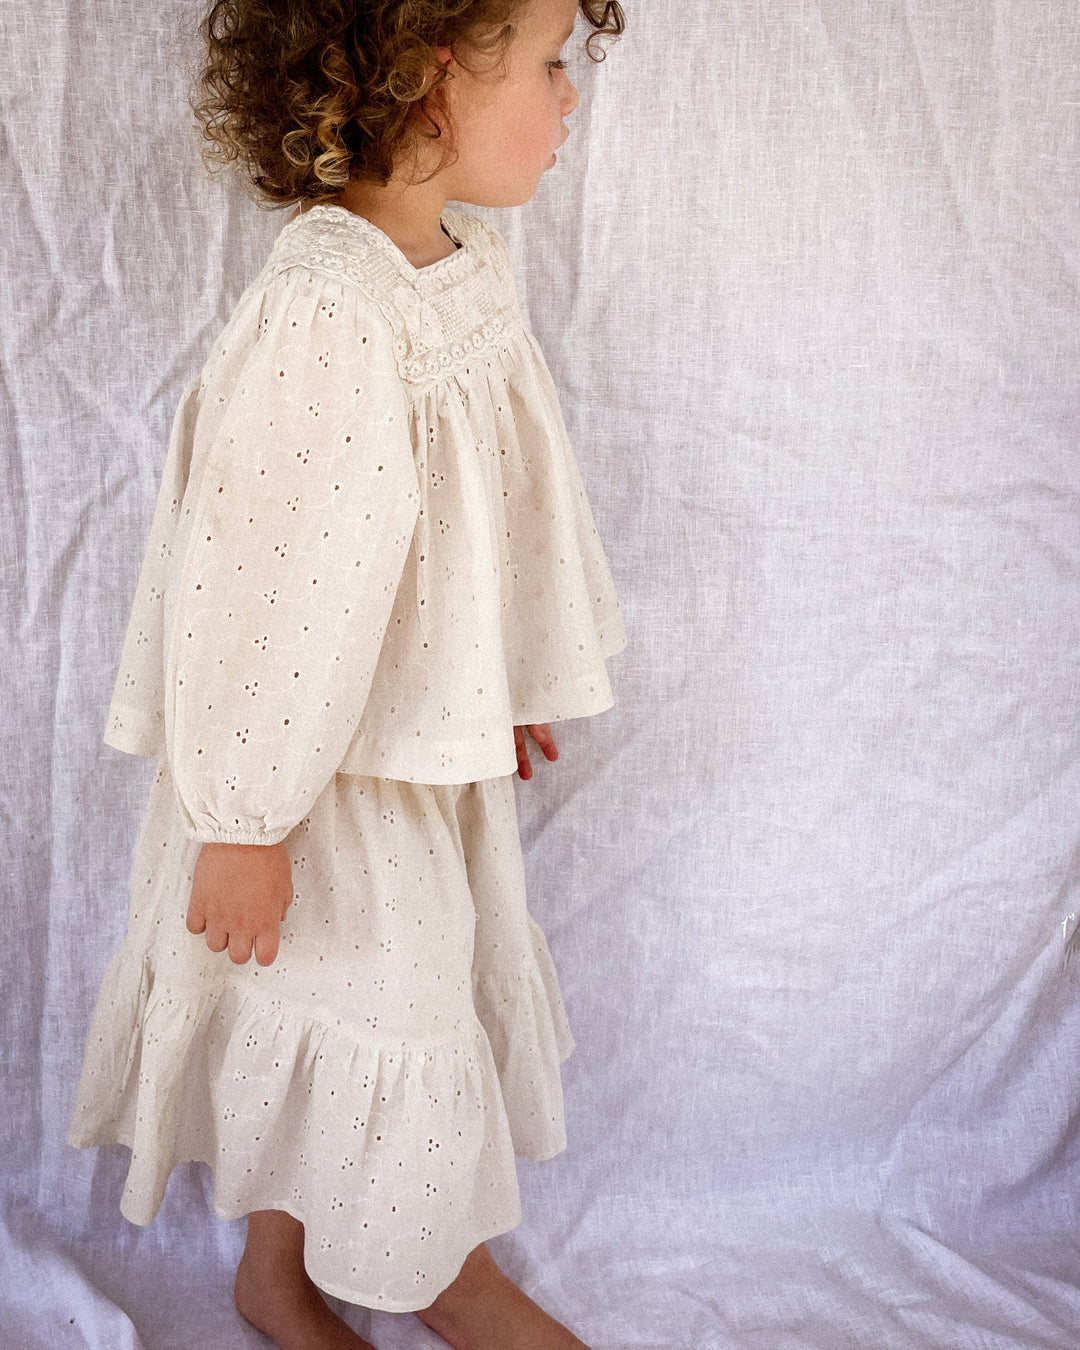 Vintage Inspired Broderie Anglaise Organic Cotton Top